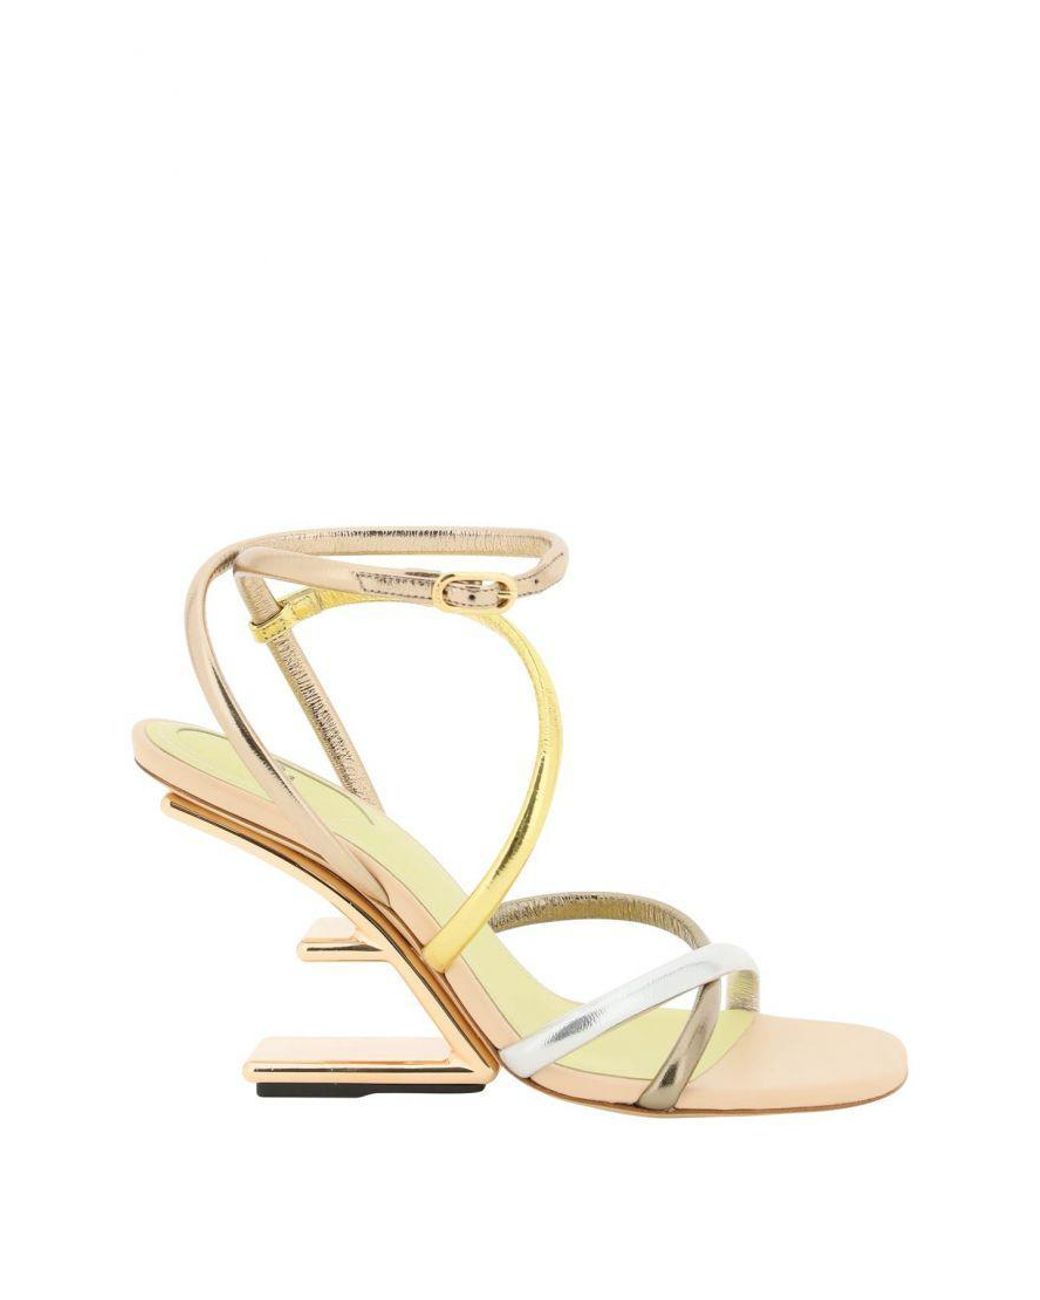 Fendi Leather Laminated Nappa First Sandals in Silver/Gold/Brown ...